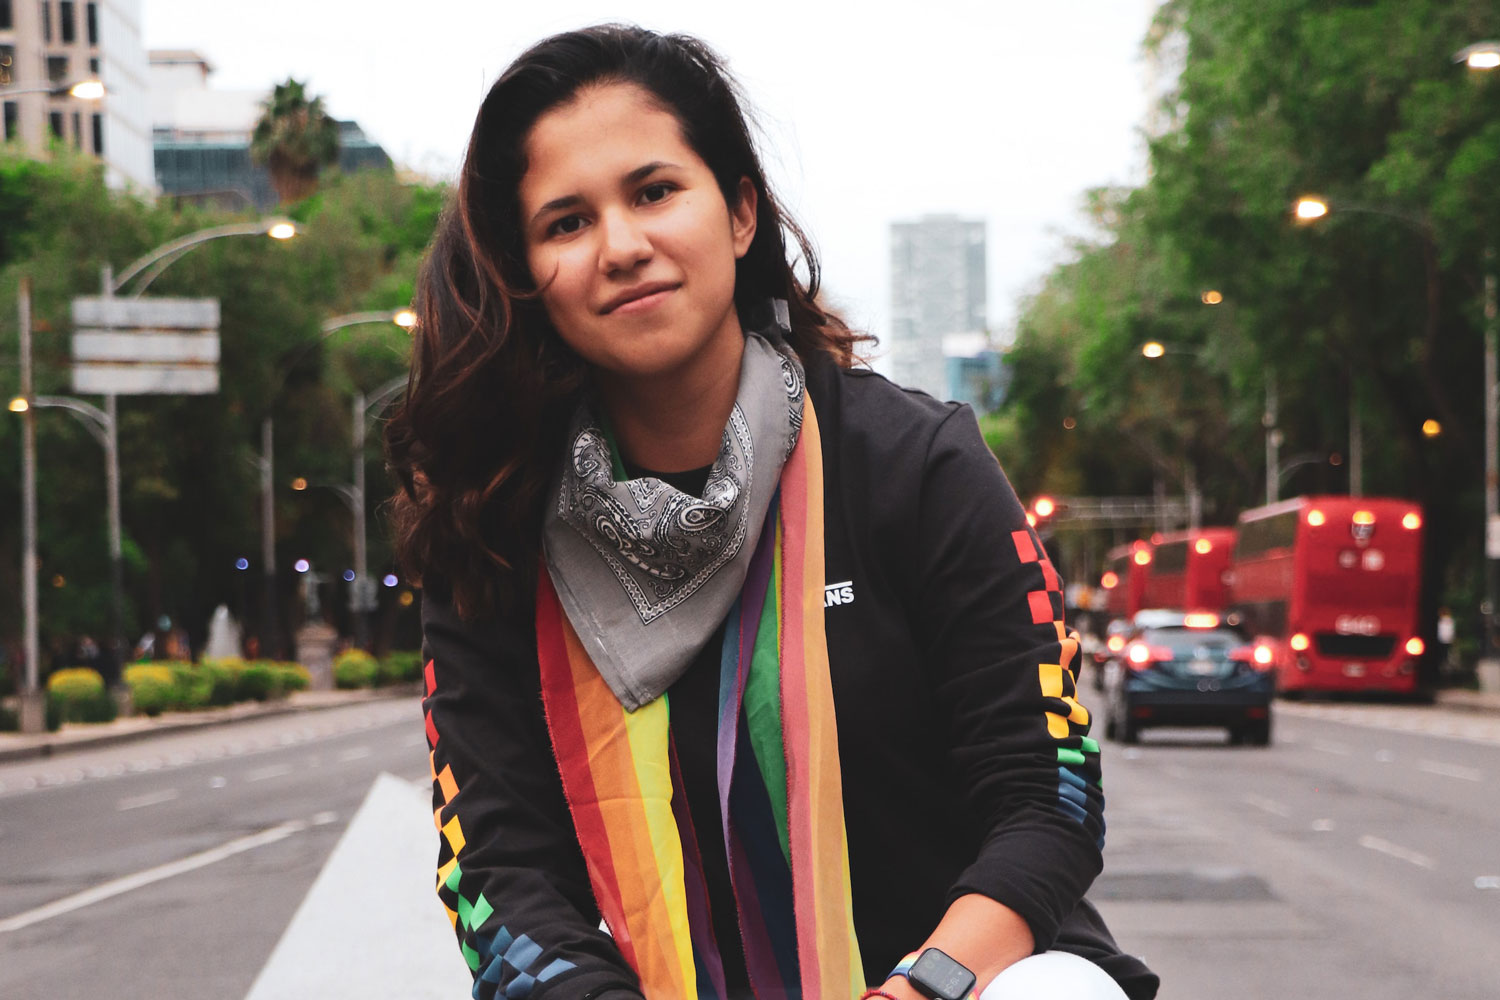 young woman with rainbow scarf